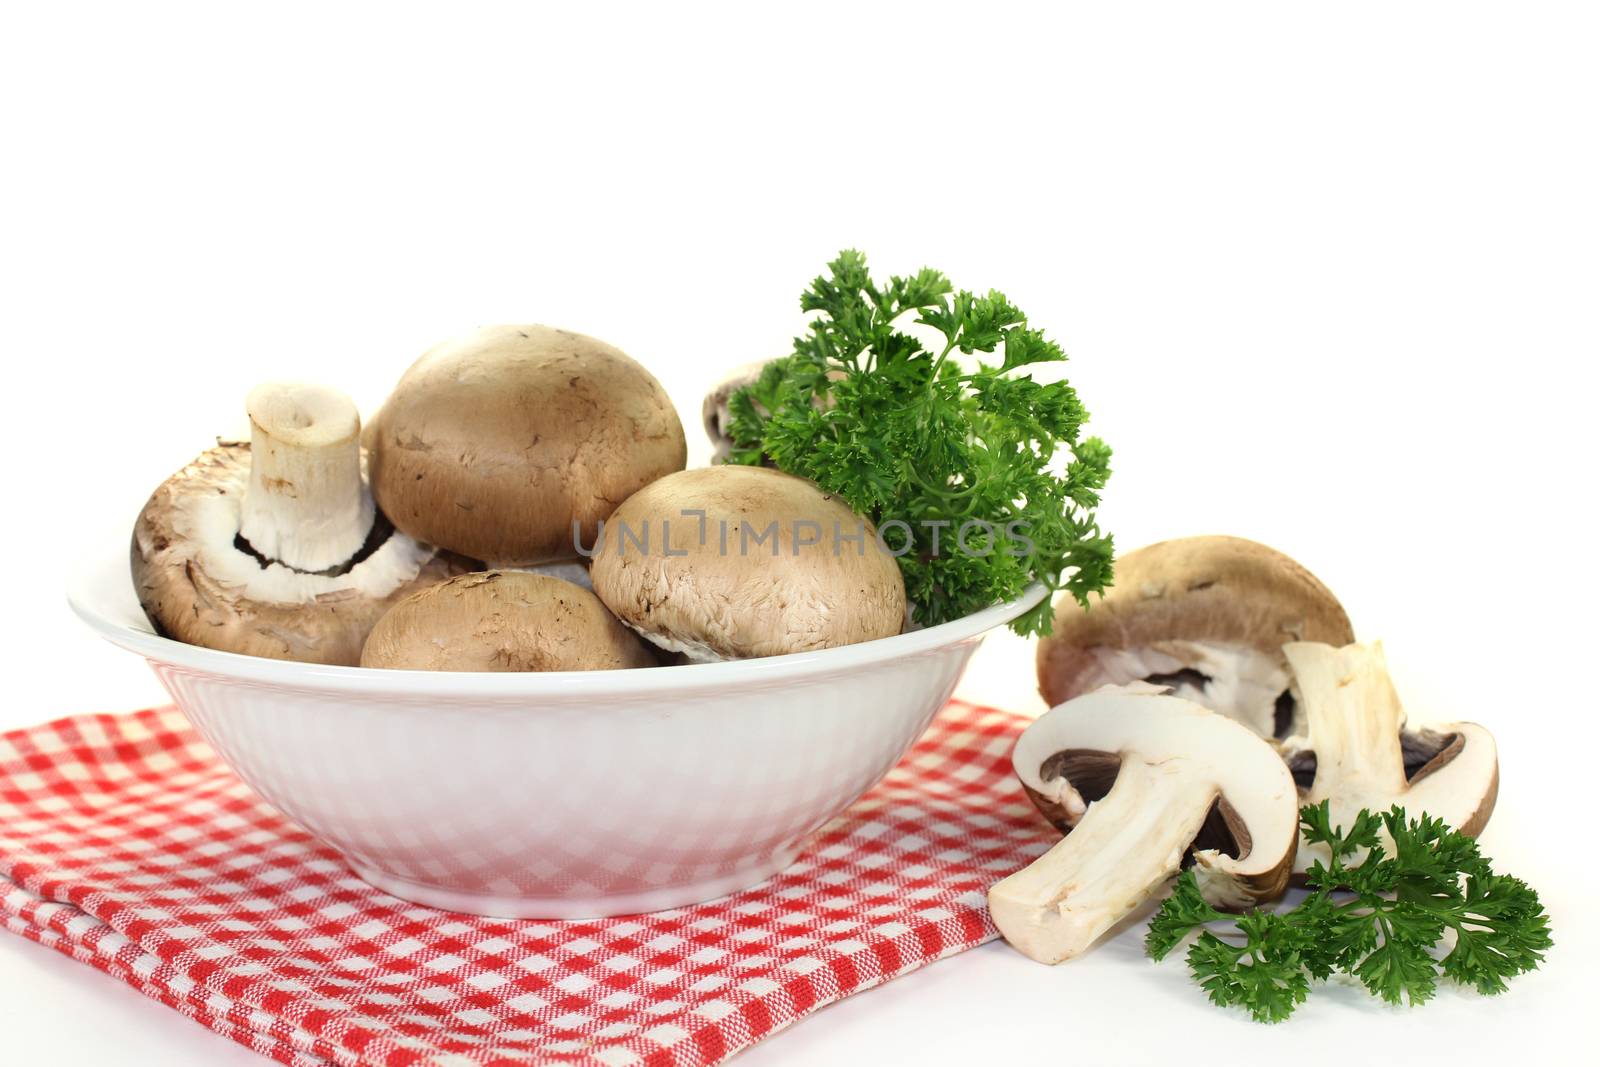 a bowl of brown mushrooms and parsley